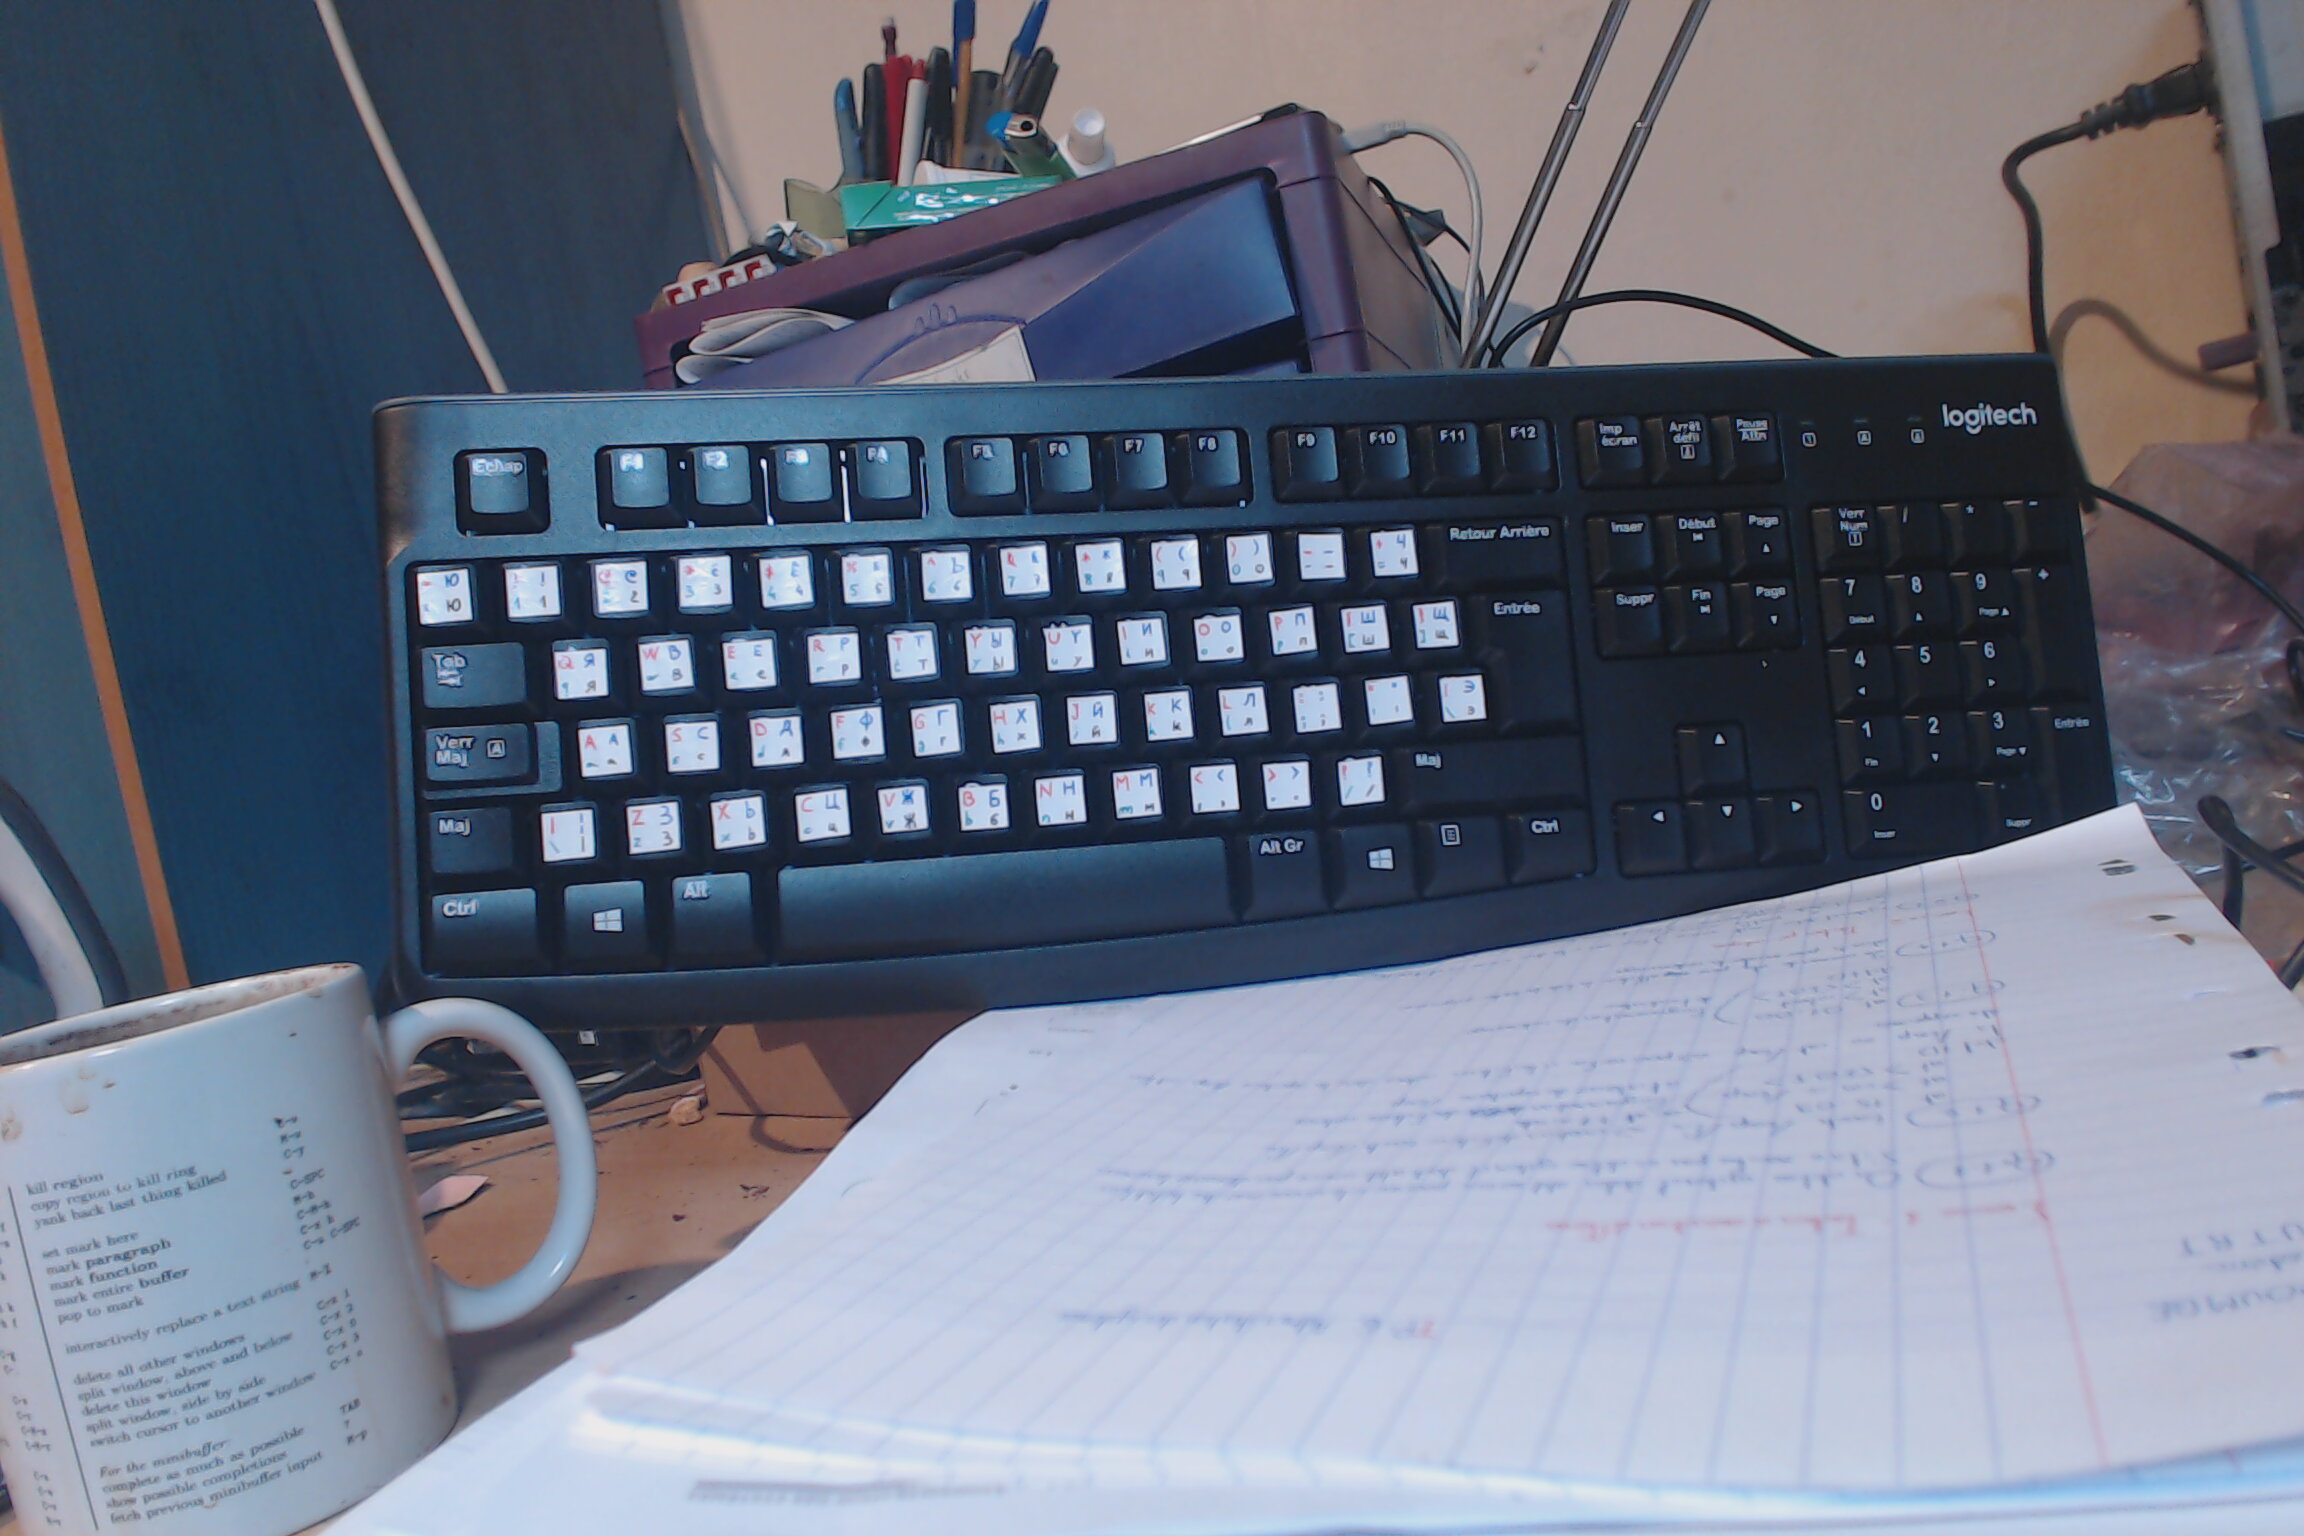 My hand-made Russian (phonetic) keyboards, image 5 of 14